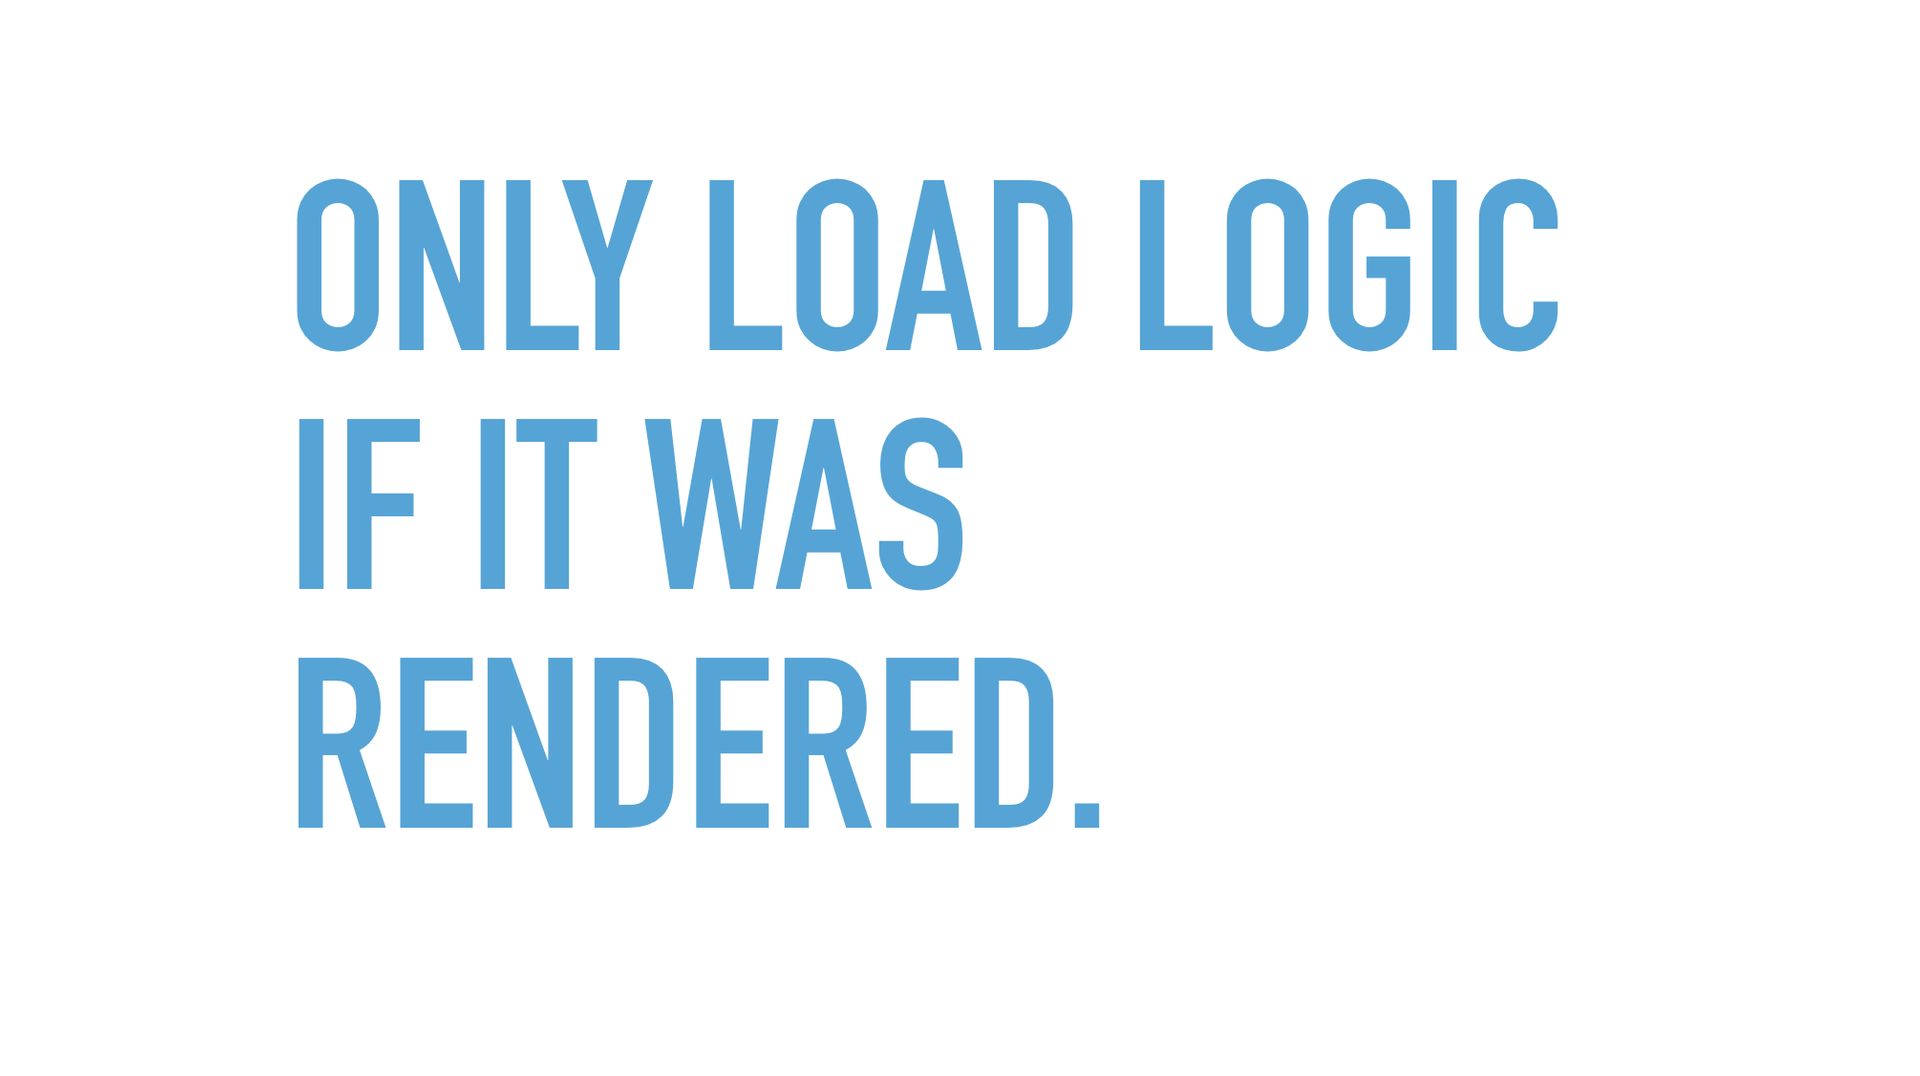 Slide text: Only load logic if it was rendered.